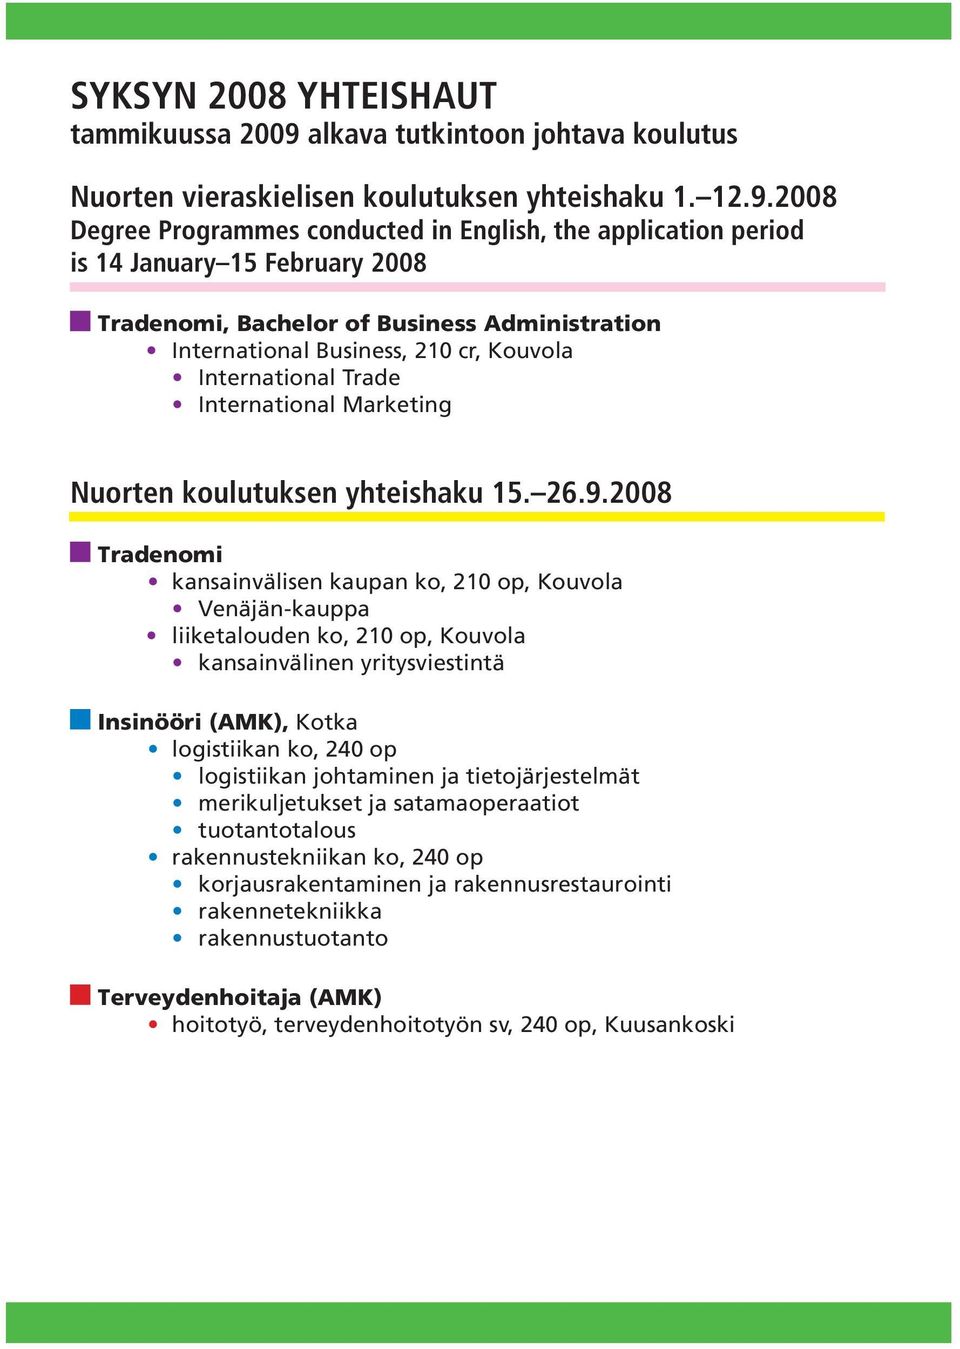 2008 Degree Programmes conducted in English, the application period is 14 January 15 February 2008 Tradenomi, Bachelor of Business Administration International Business, 210 cr, Kouvola International